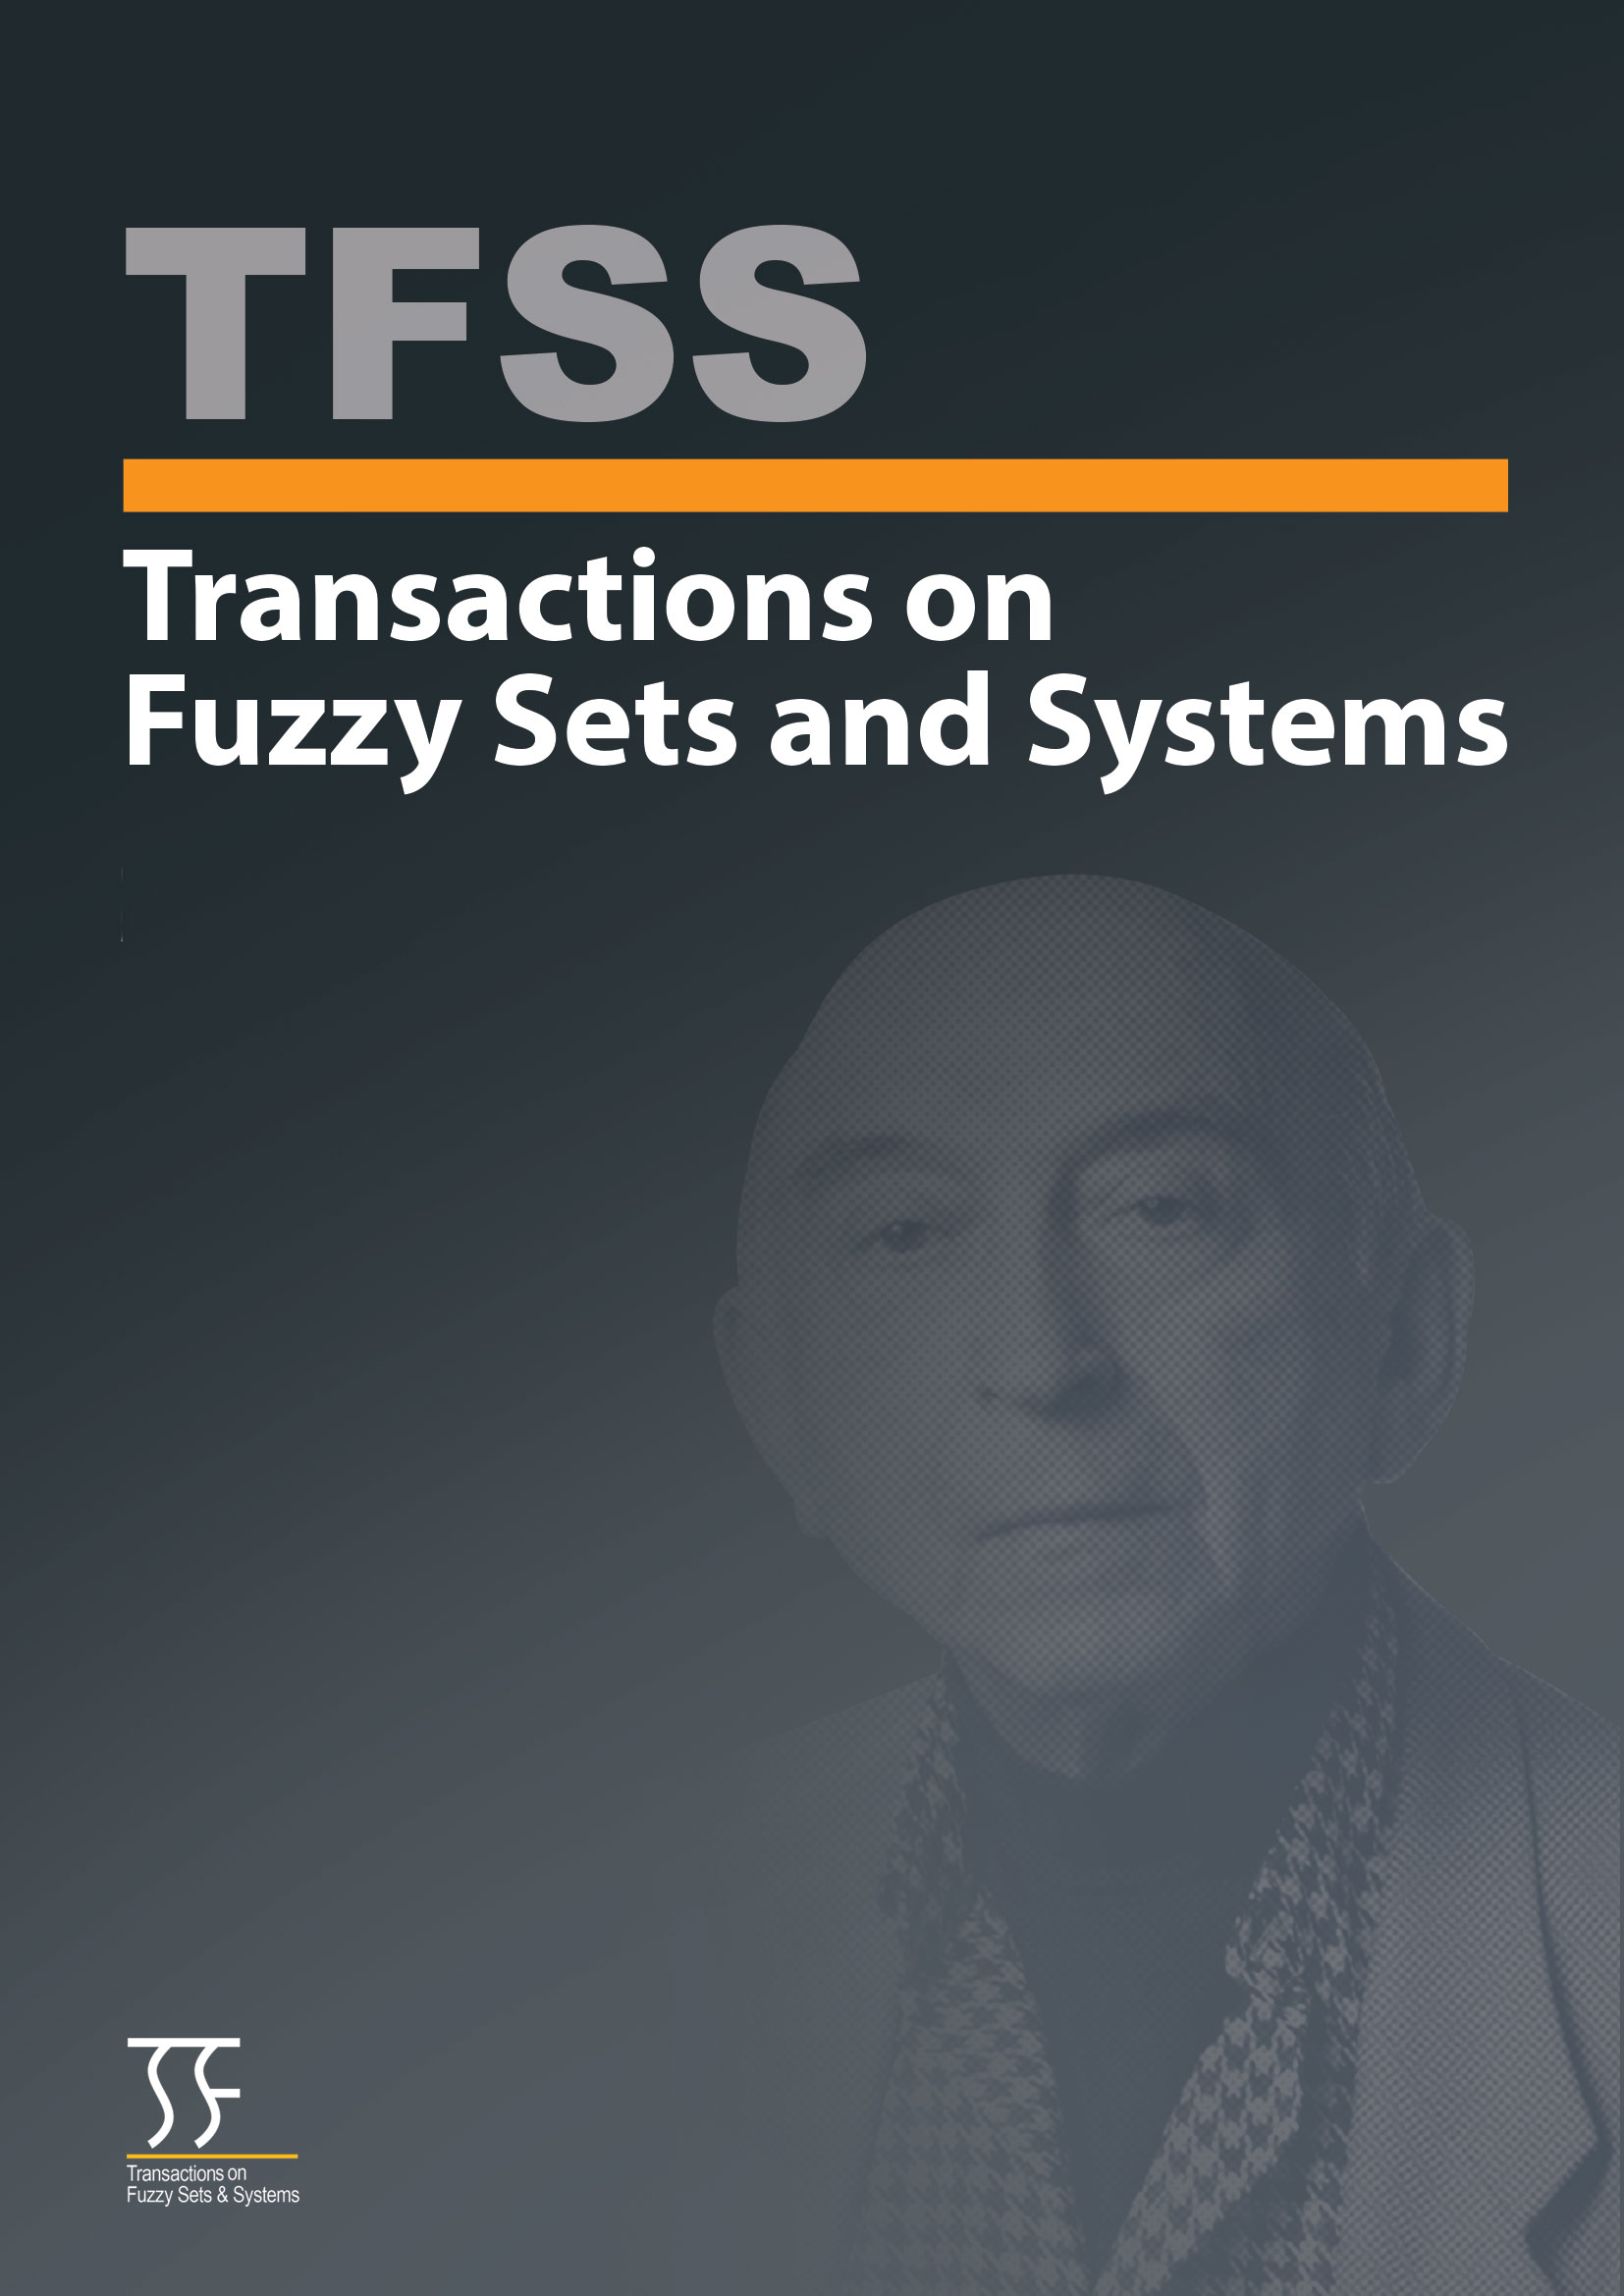 Transactions on Fuzzy Sets and Systems (TFSS) is an open access international scholarly journal.  TFSS publishes new applied and pure articles related to fuzzy sets and systems as the two-quarterly journal and there is no charge for publishing an article in TFSS.   All articles will be peer-review before publication. Manuscripts submitted to TFSS must be original and unpublished and not currently being considered for publication elsewhere. The articles will be deposited immediately into the online repository, after the completion of the review processes.  TFSS aims linking the ideas and techniques of fuzzy sets and systems with other disciplines to provide an international forum for refereed original research works in the theory and applications in all fields related to fuzzy science.